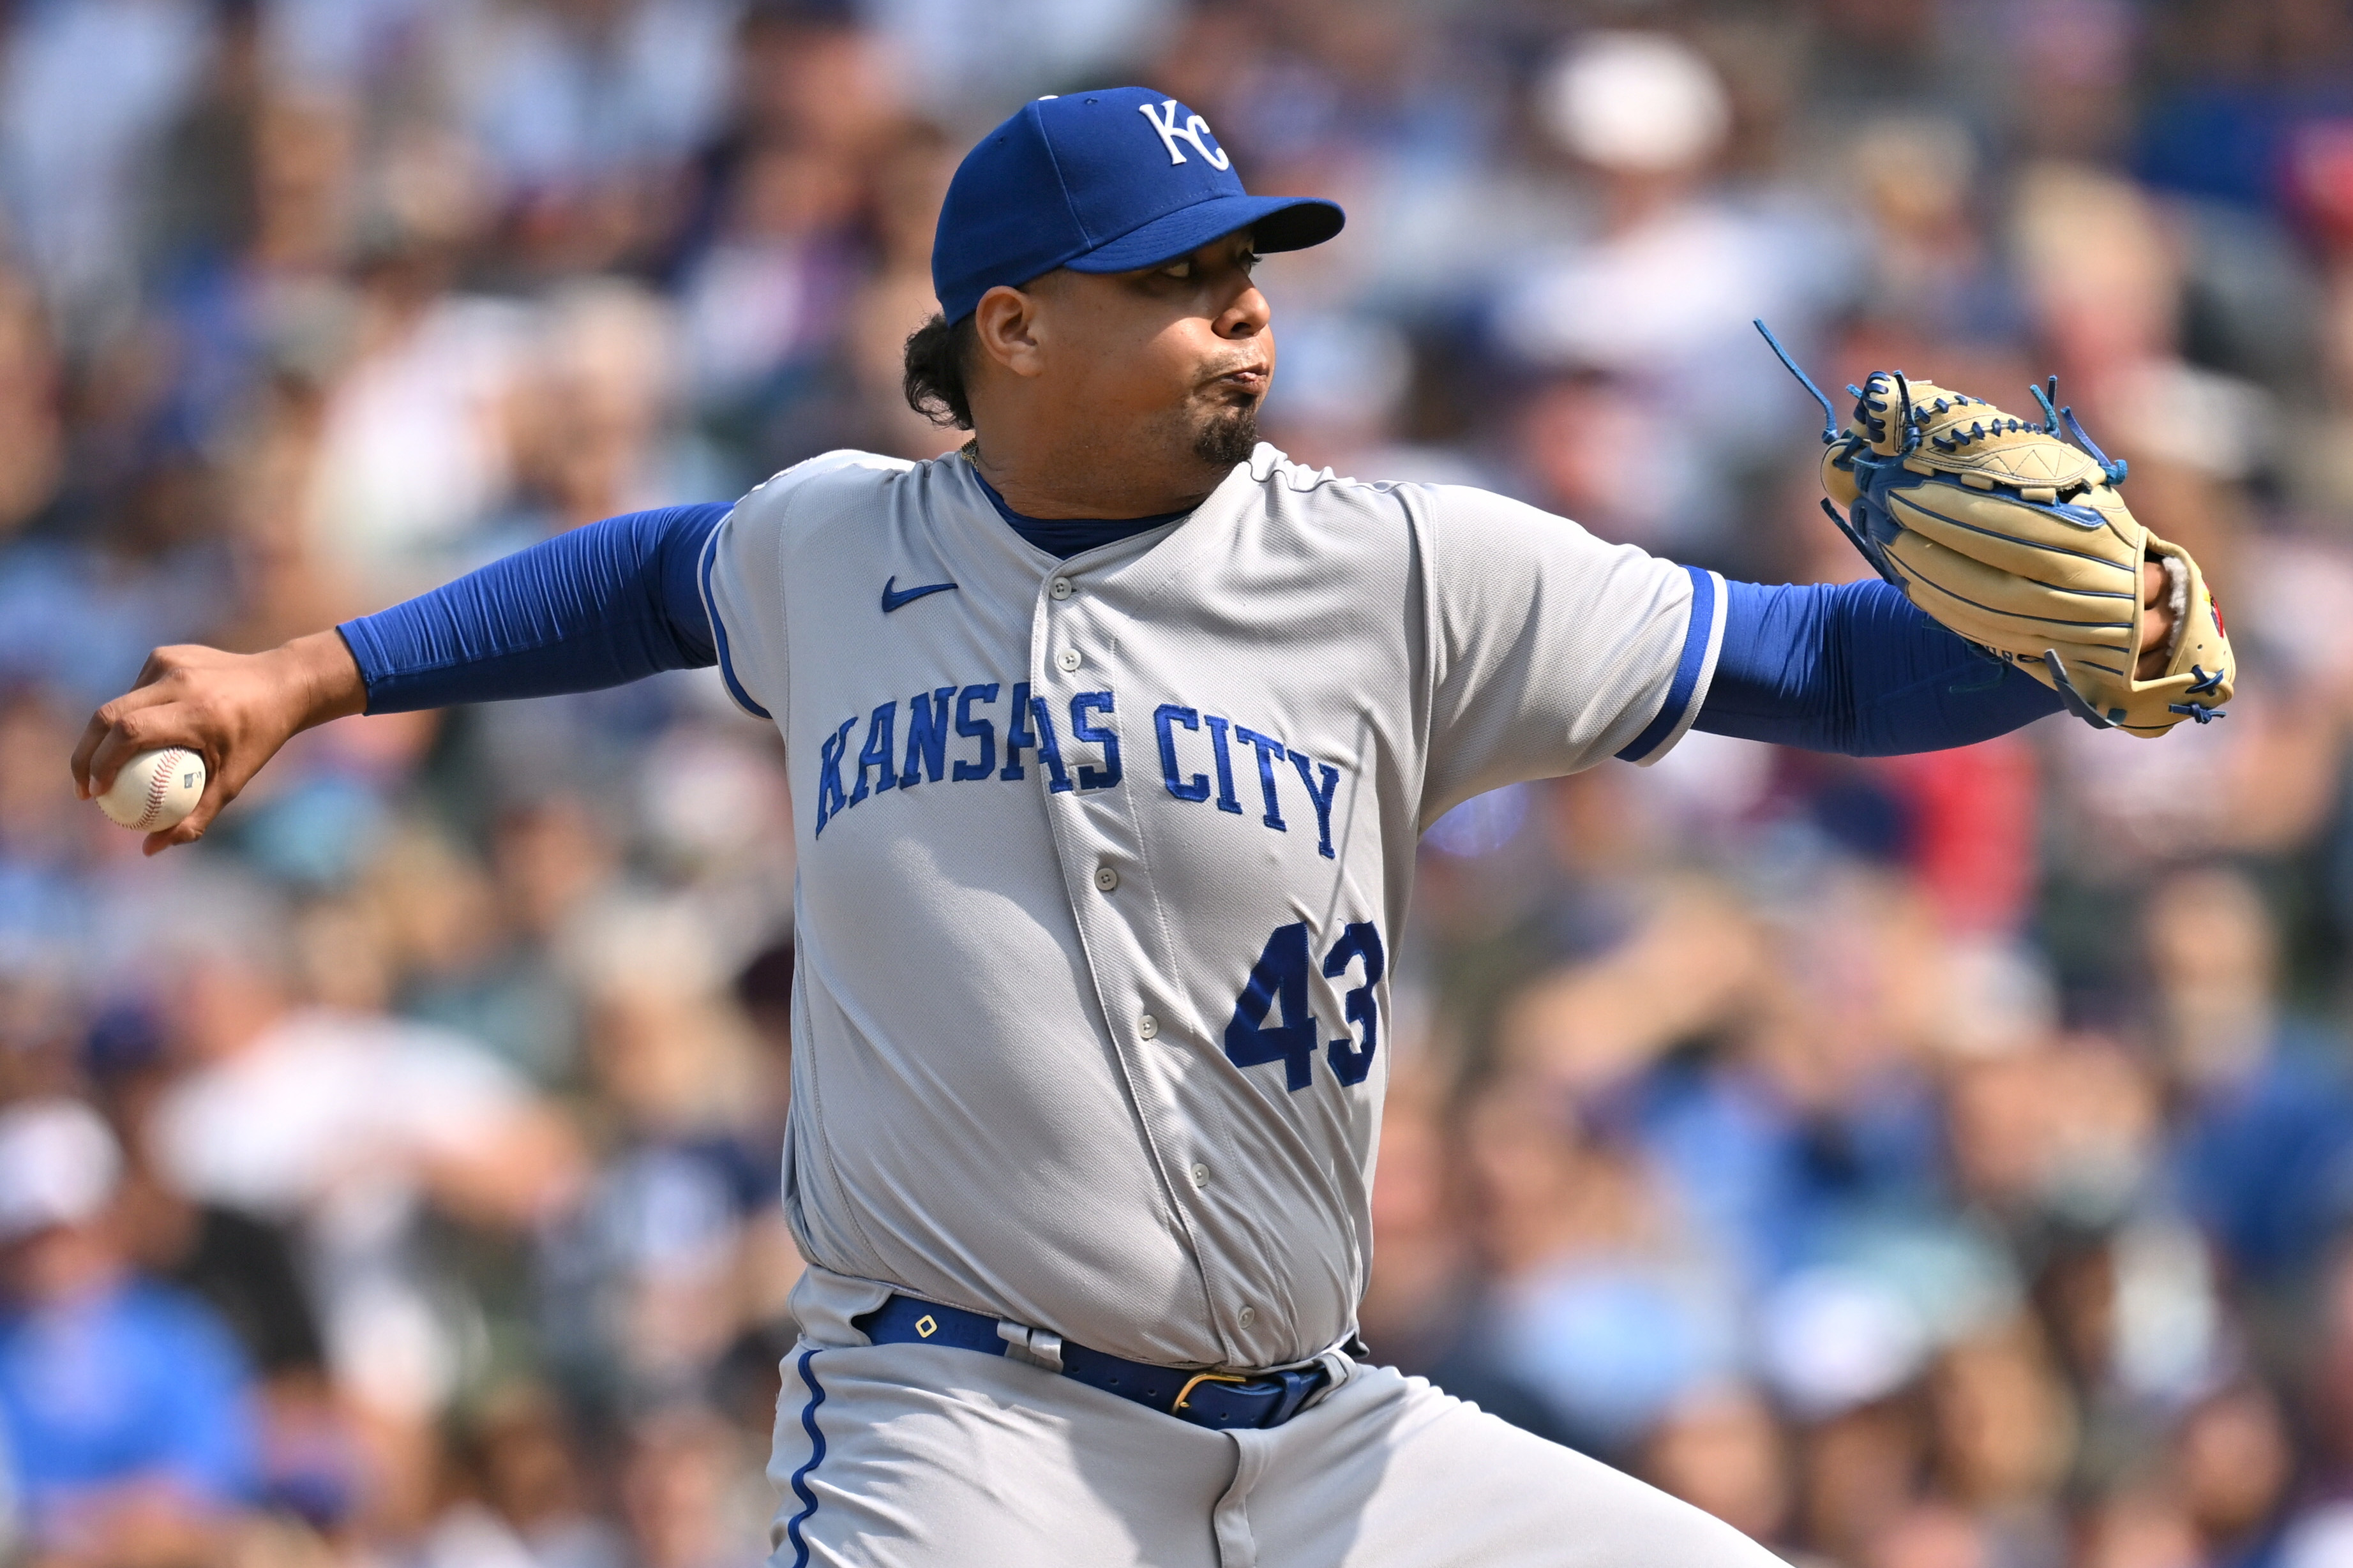 Ranking the best Royals jerseys - Royals Review